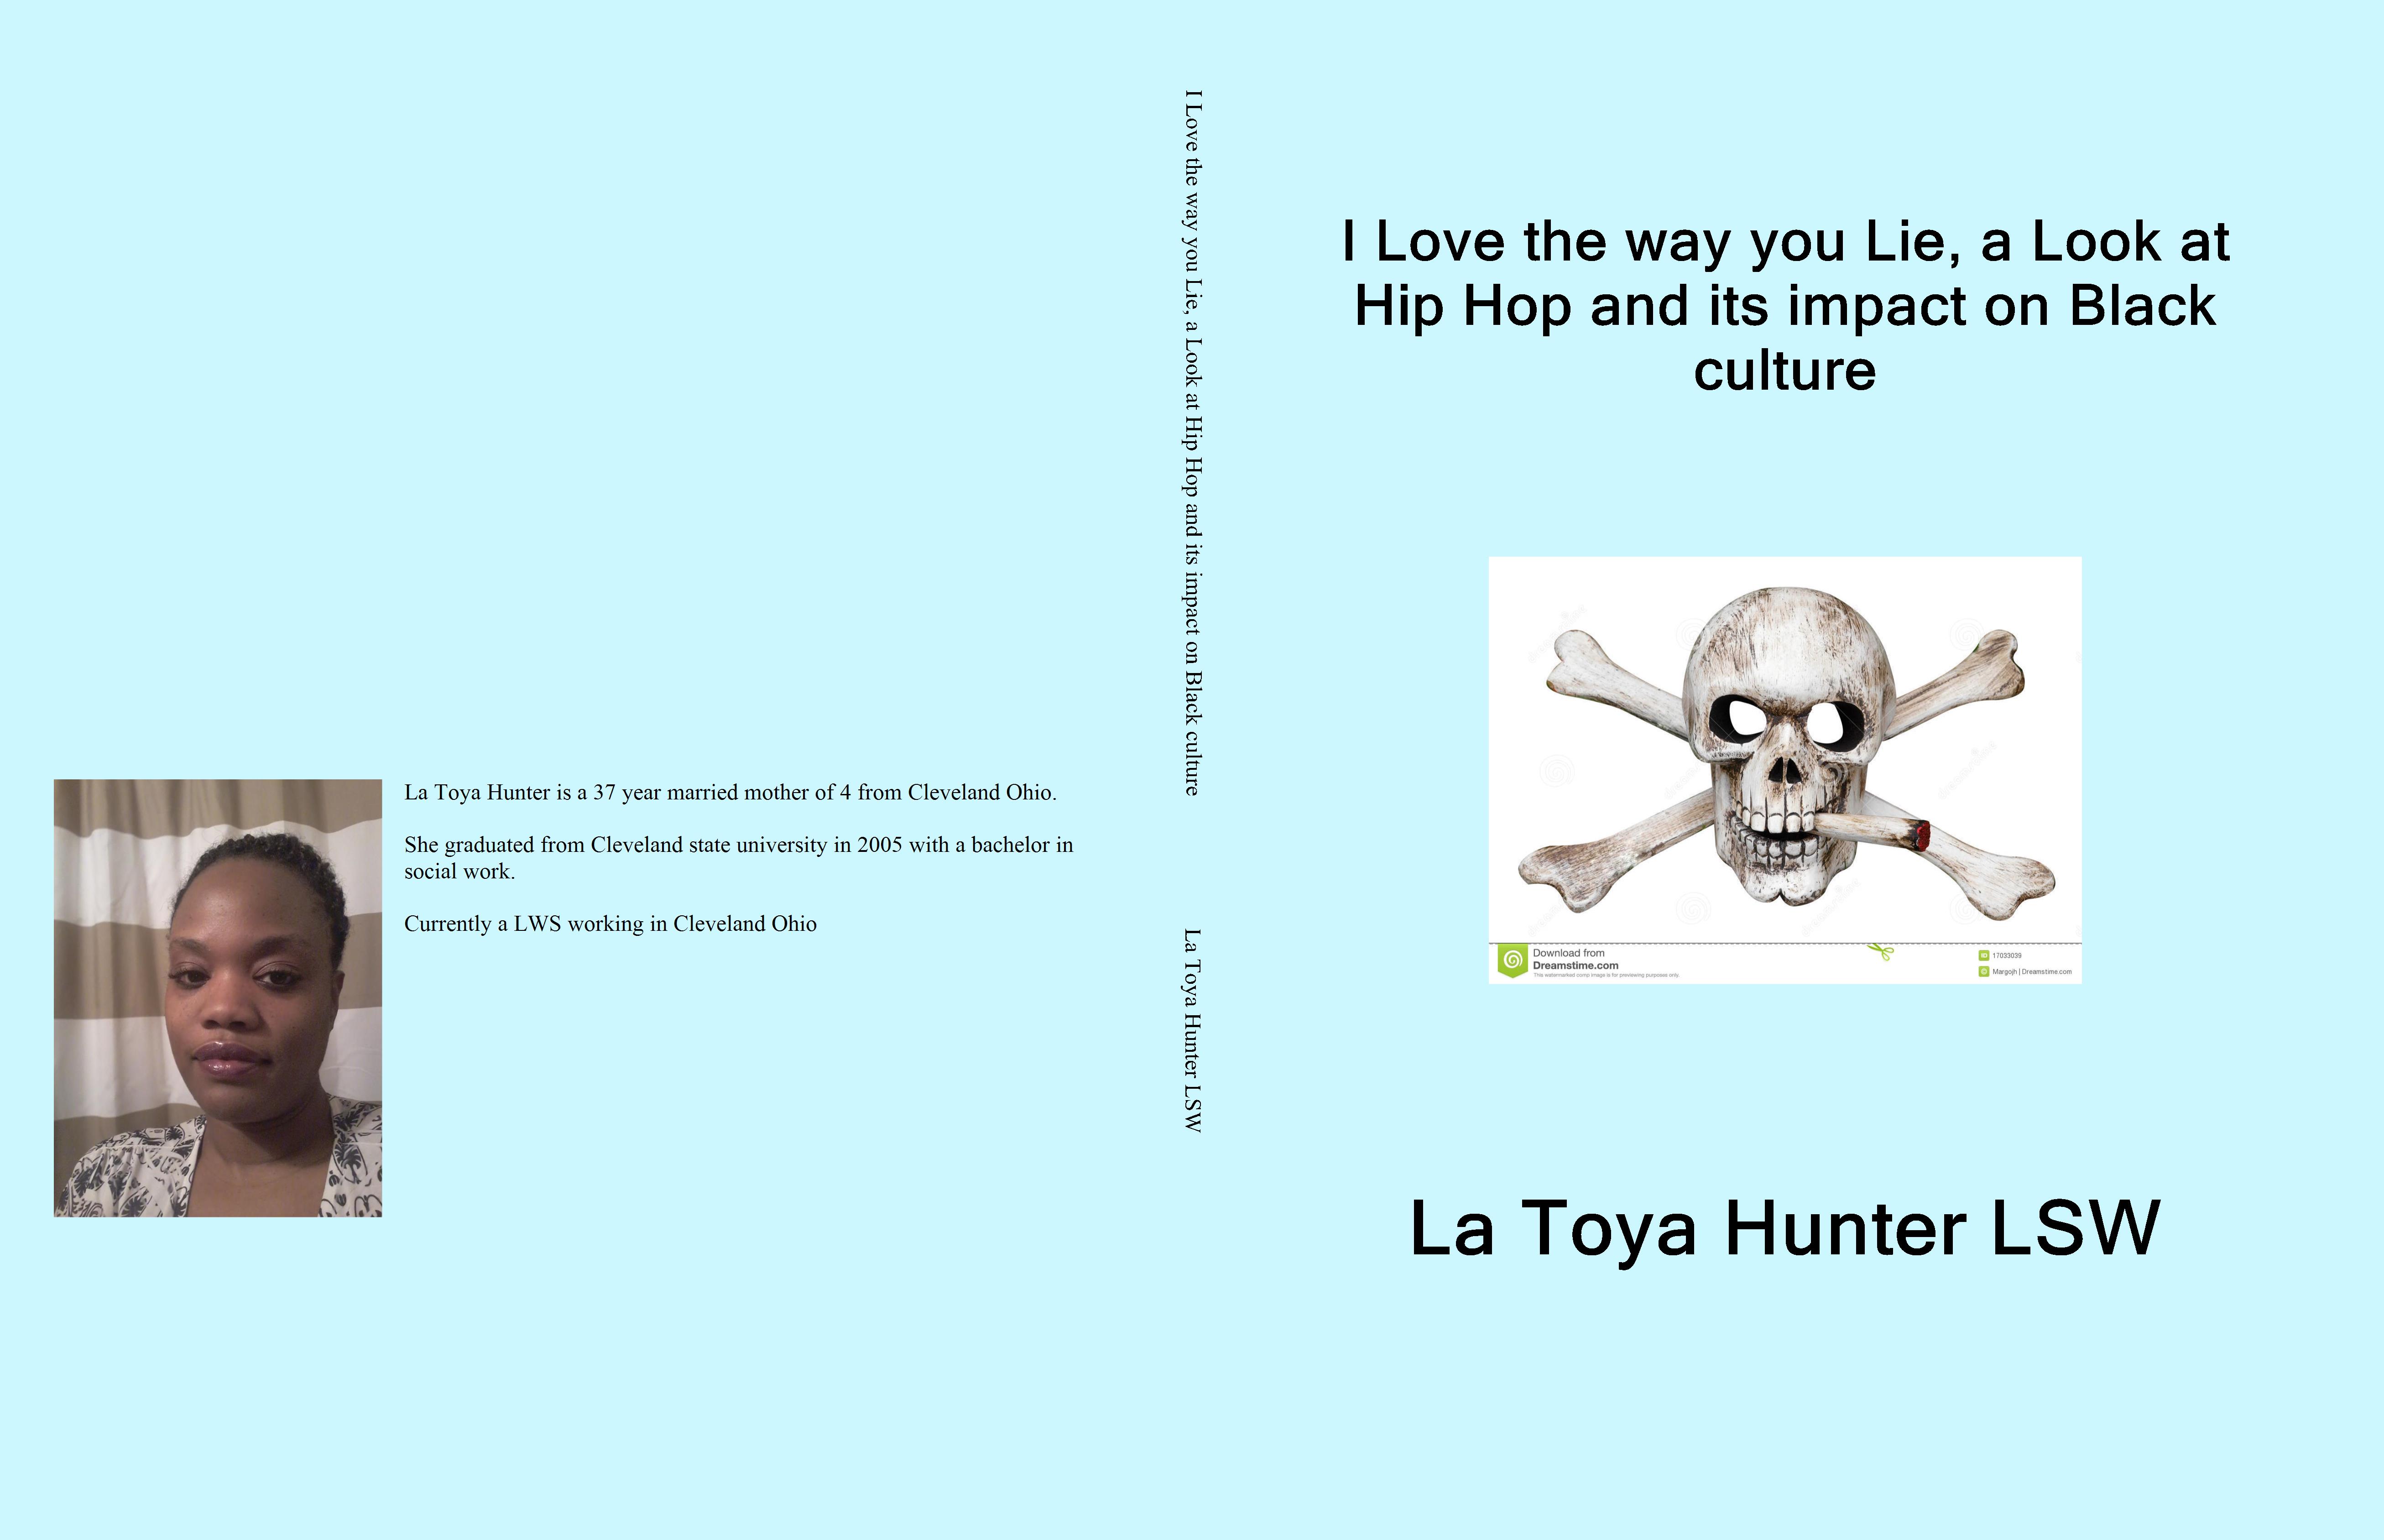 I Love the way you Lie, a Look at Hip Hop and its impact on Black culture cover image